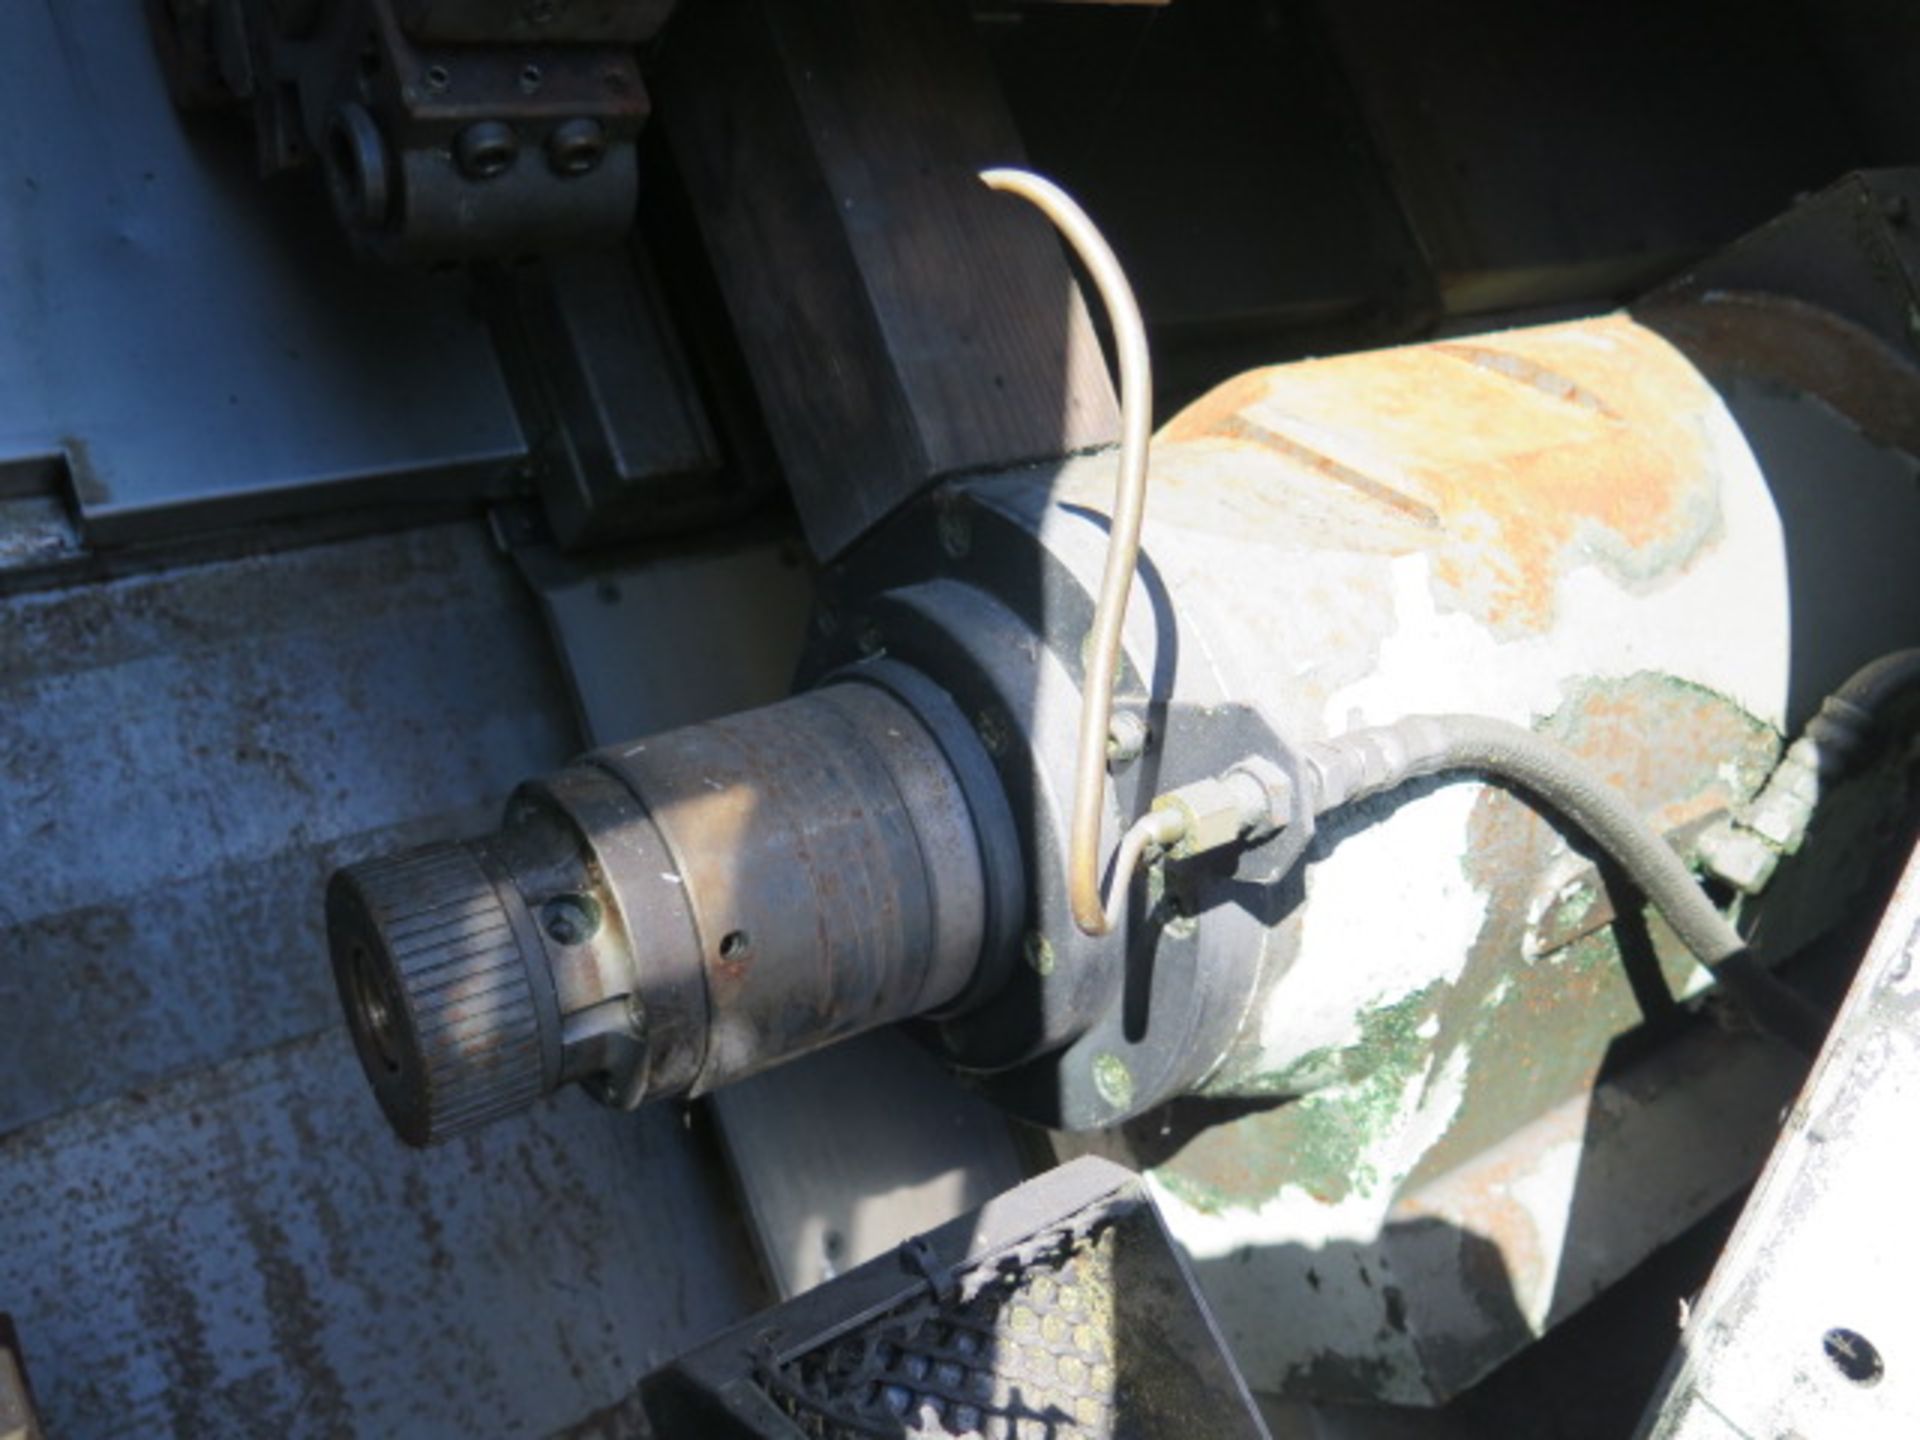 Mori Seiki ZL-15SM Twin Spindle - Twin Turret CNC Turning Center (NEEDS WORK) s/n 254, SOLD AS IS - Image 9 of 13